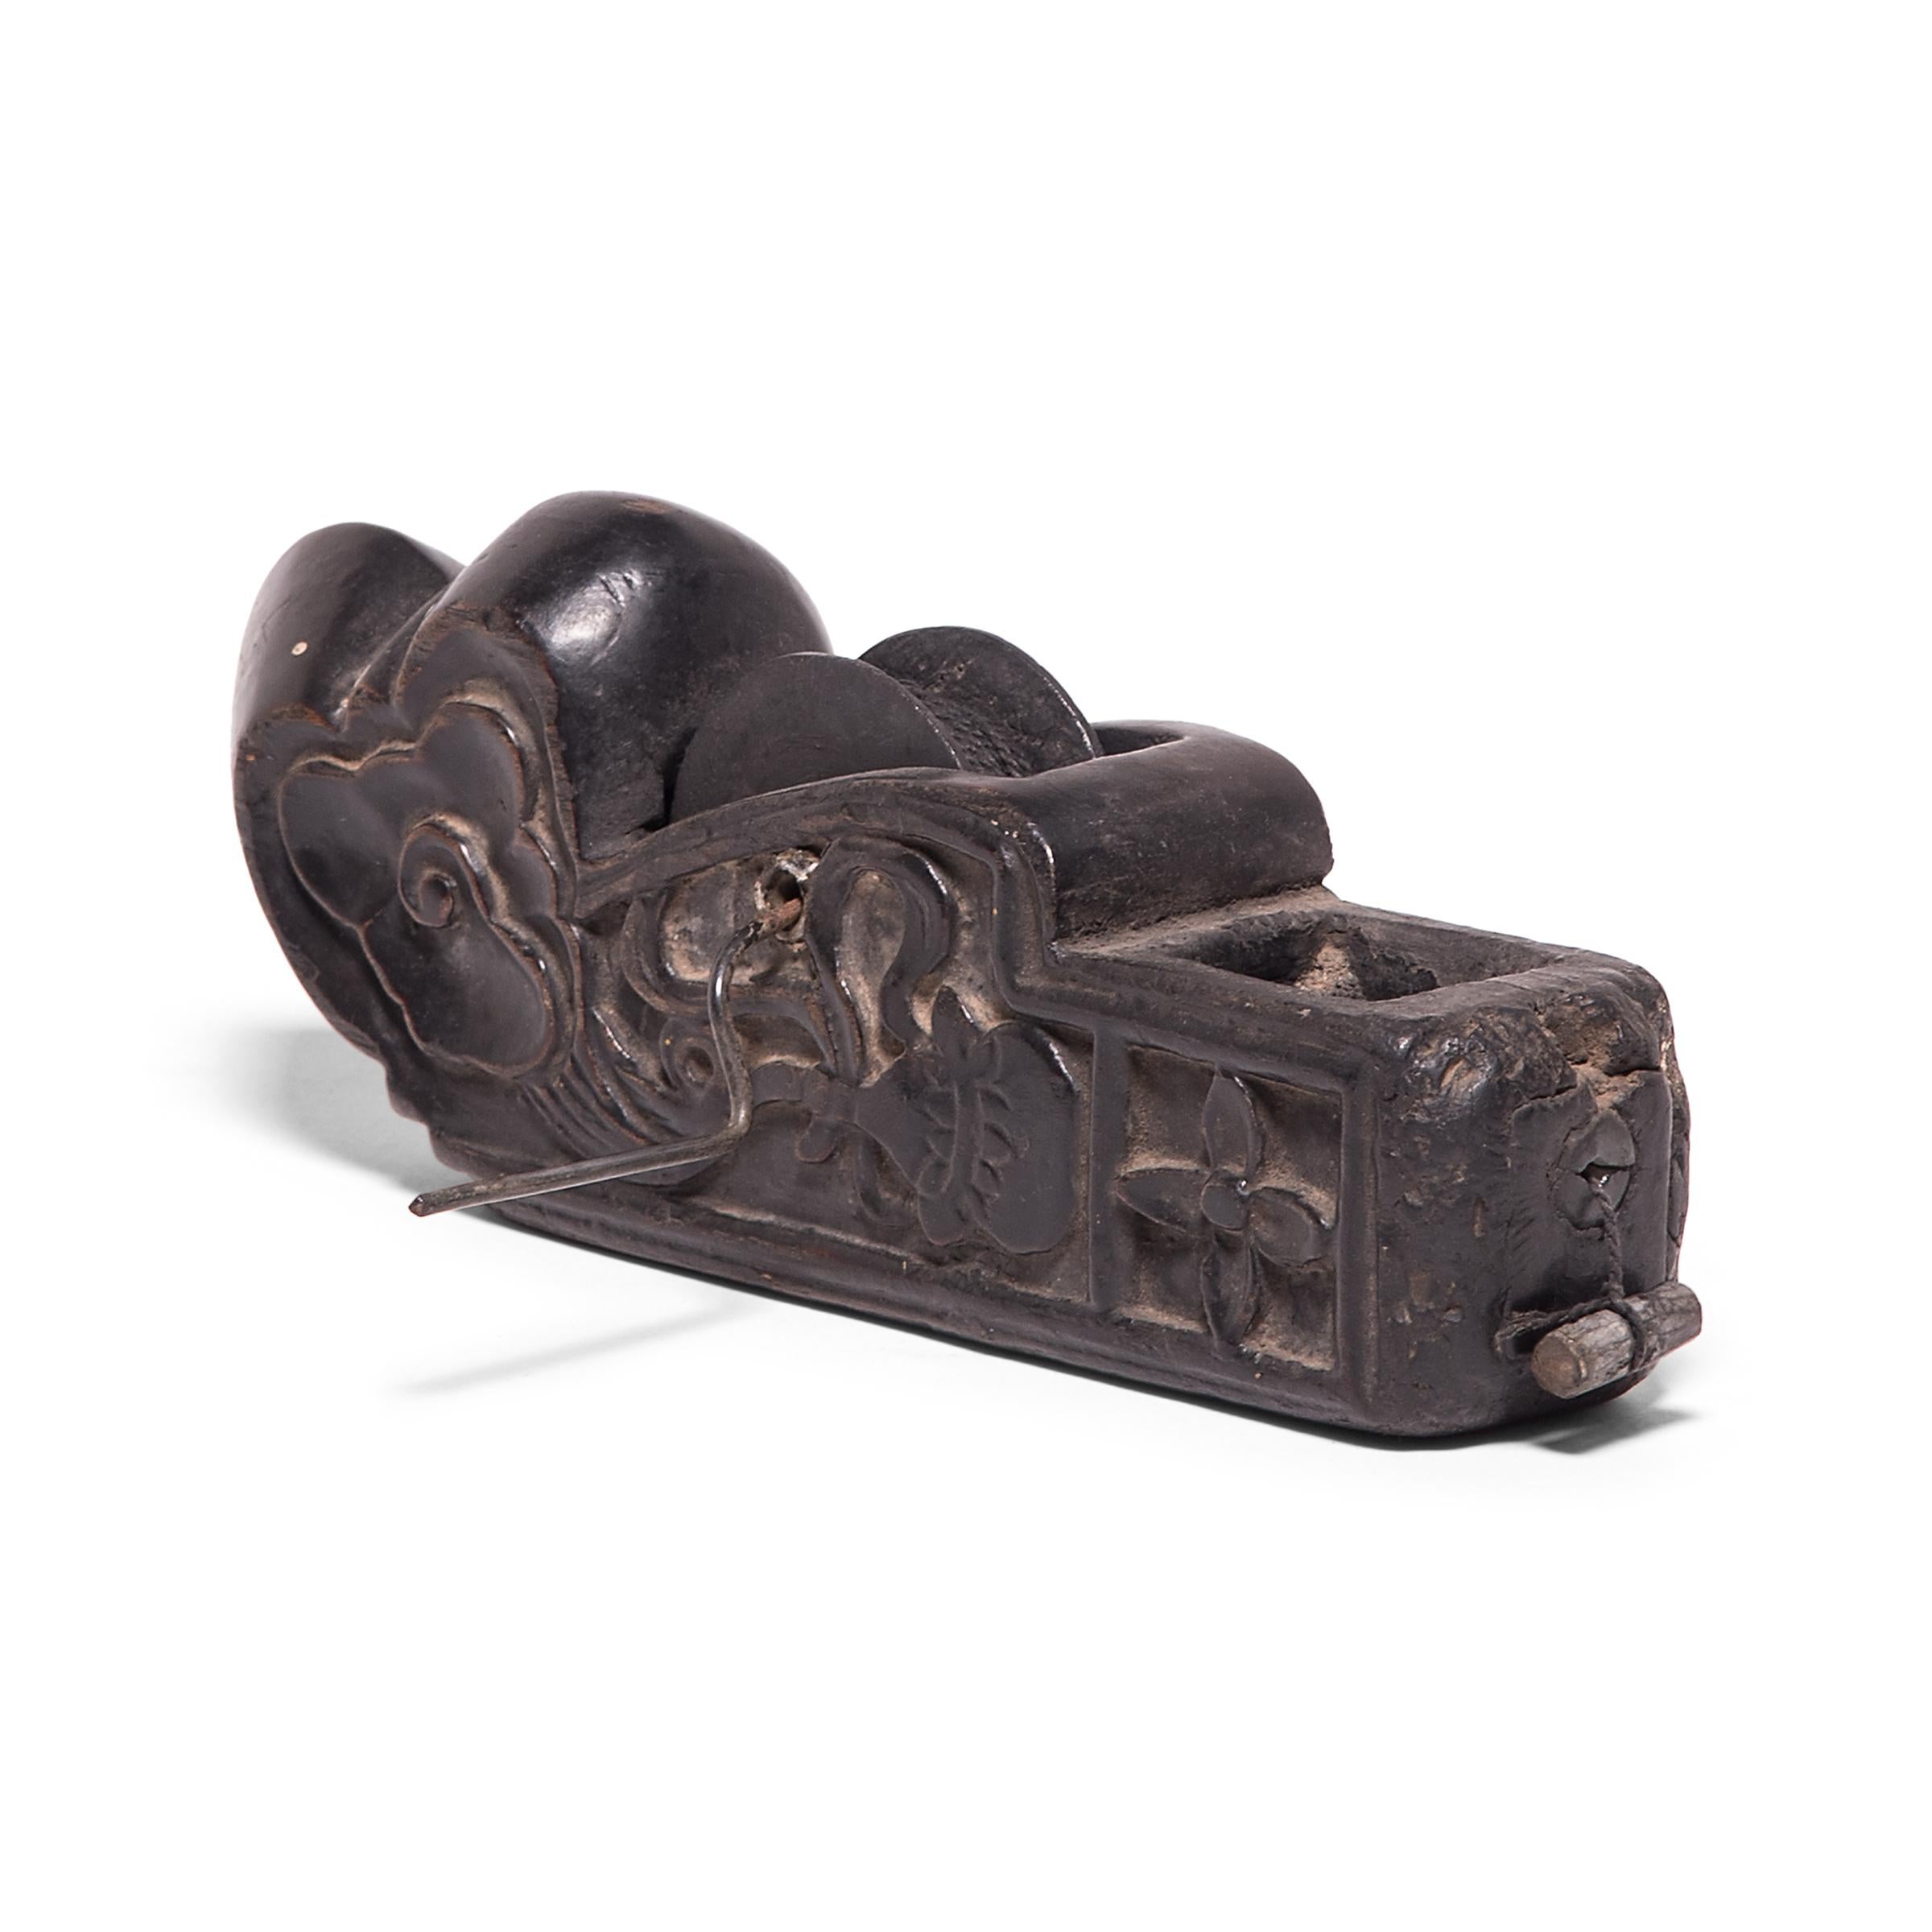 Given the beauty and thoughtful design of traditional Chinese furniture, it’s no wonder that Qing-dynasty carpenter’s tools were accorded the same attention to detail. This remarkably intact 19th century inkline reel was hand carved from northern